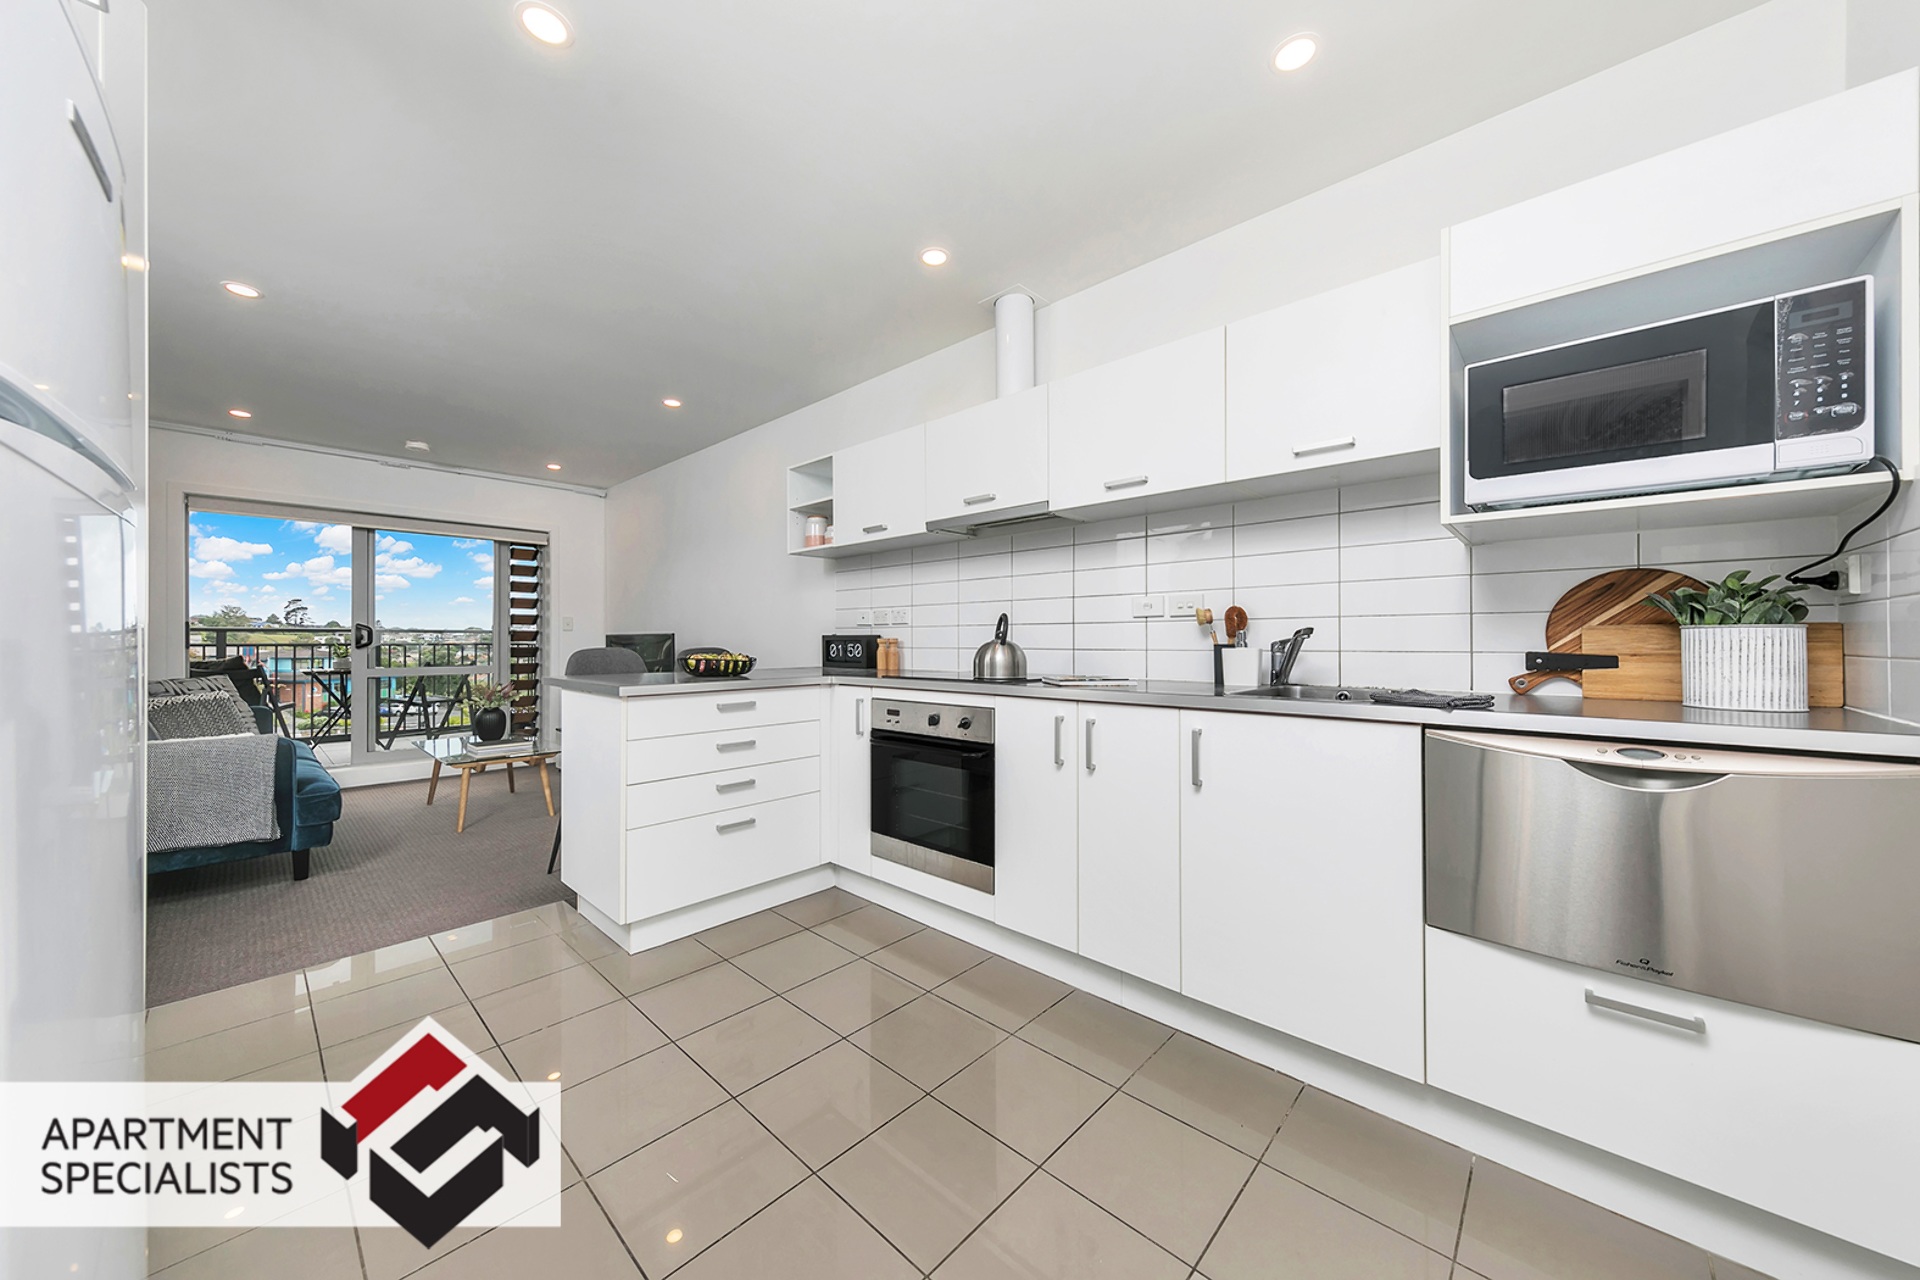 6 | 71 Spencer Road, Albany | Apartment Specialists